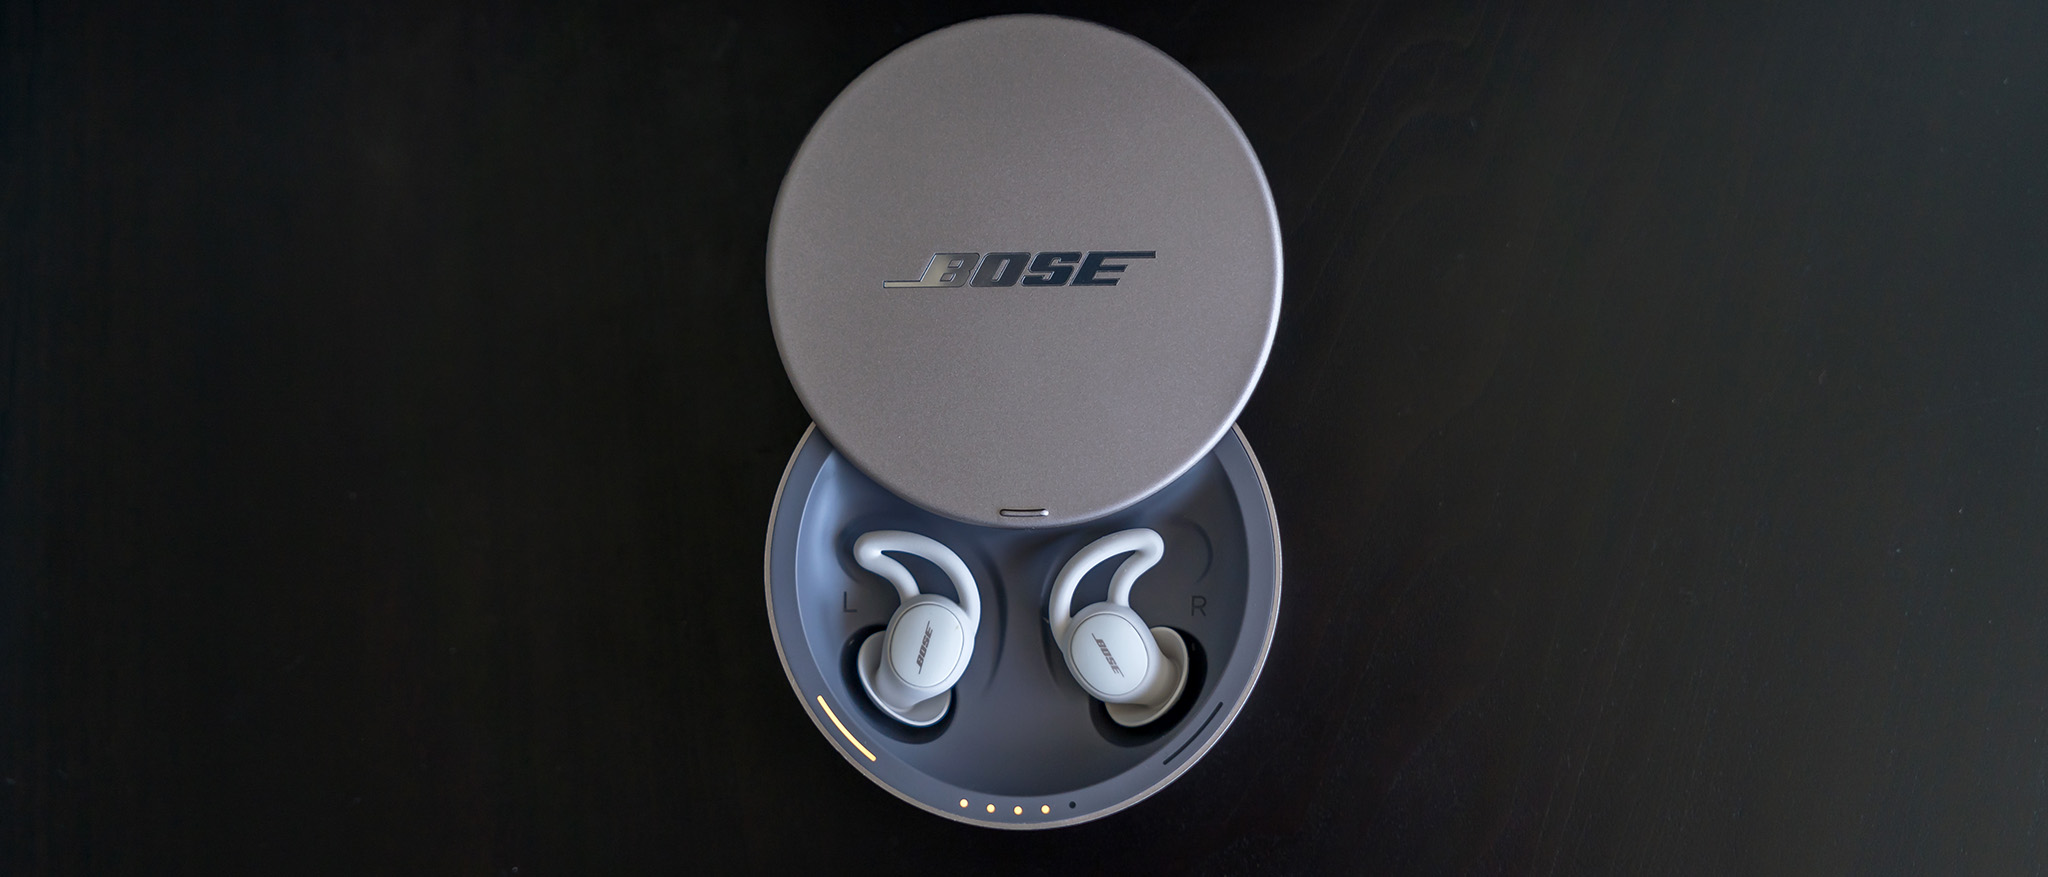 Arne definitive Pebish Bose Sleepbuds II review: Keeping eyes closed every night | Android Central